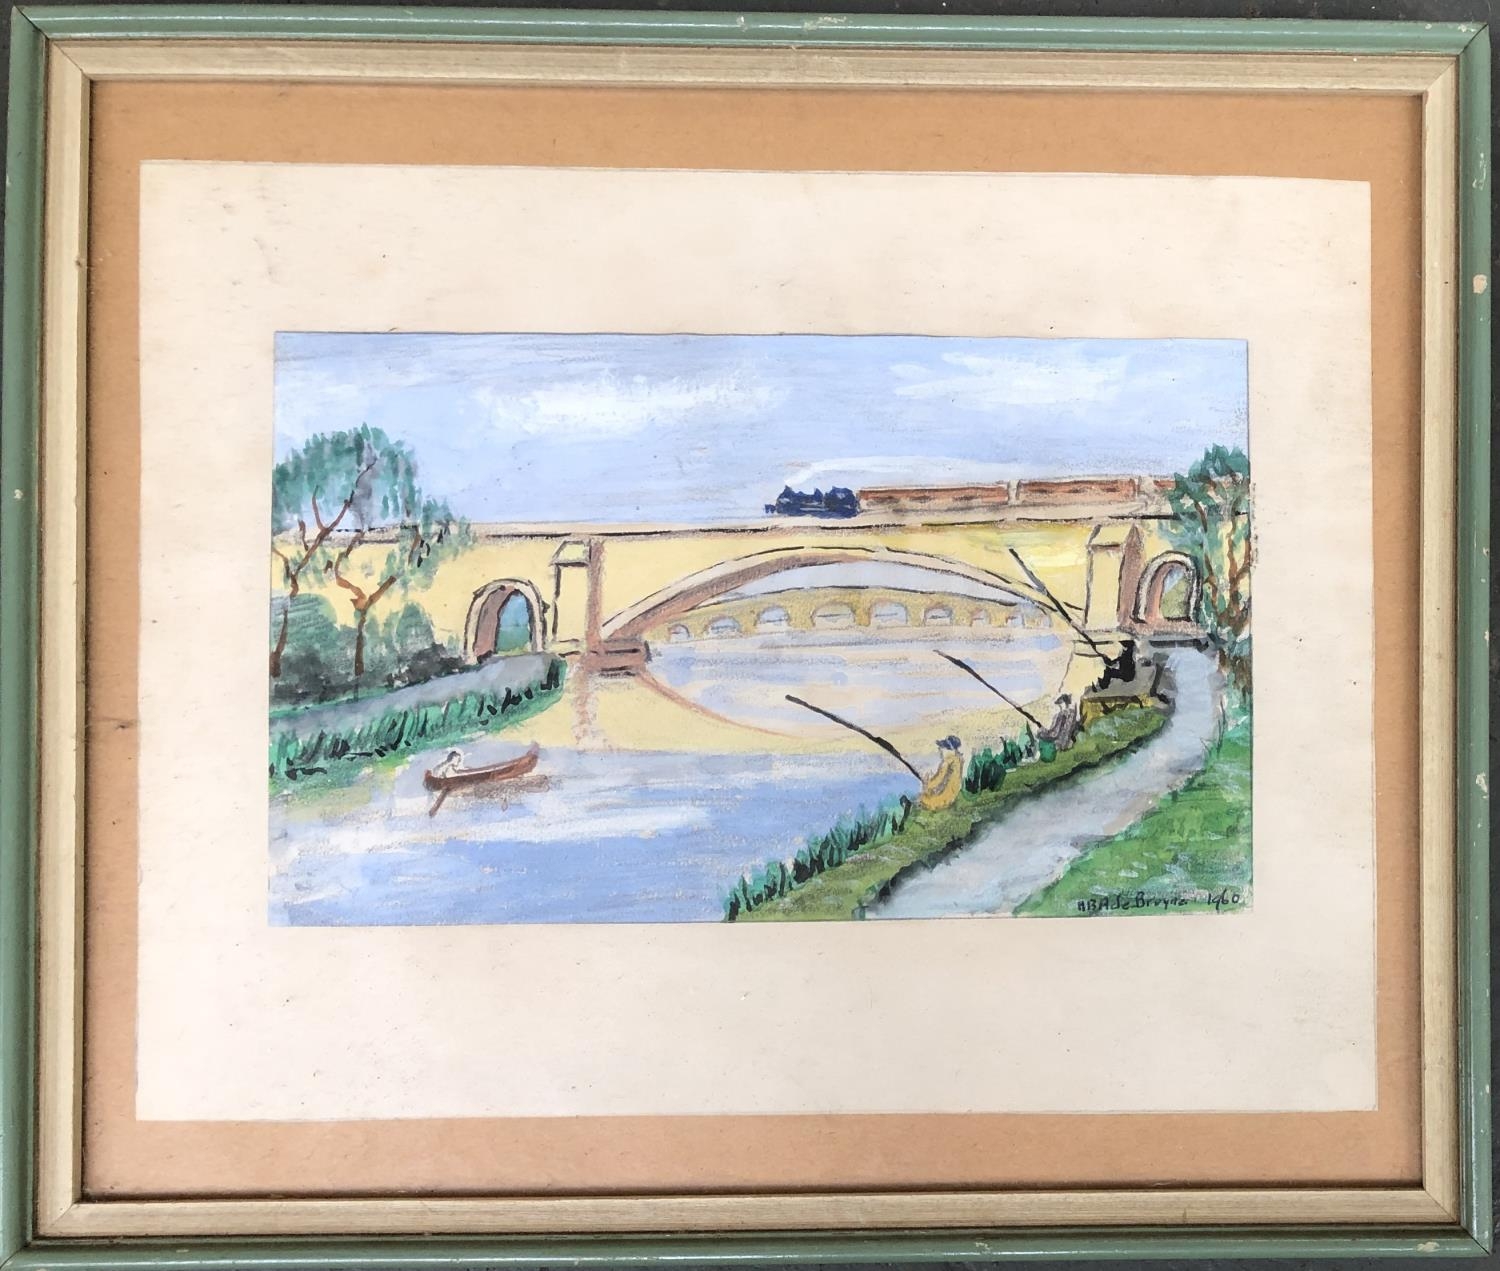 A 20th century gouache of people fishing beside a bridge with train passing over, signed 'H.B.A.